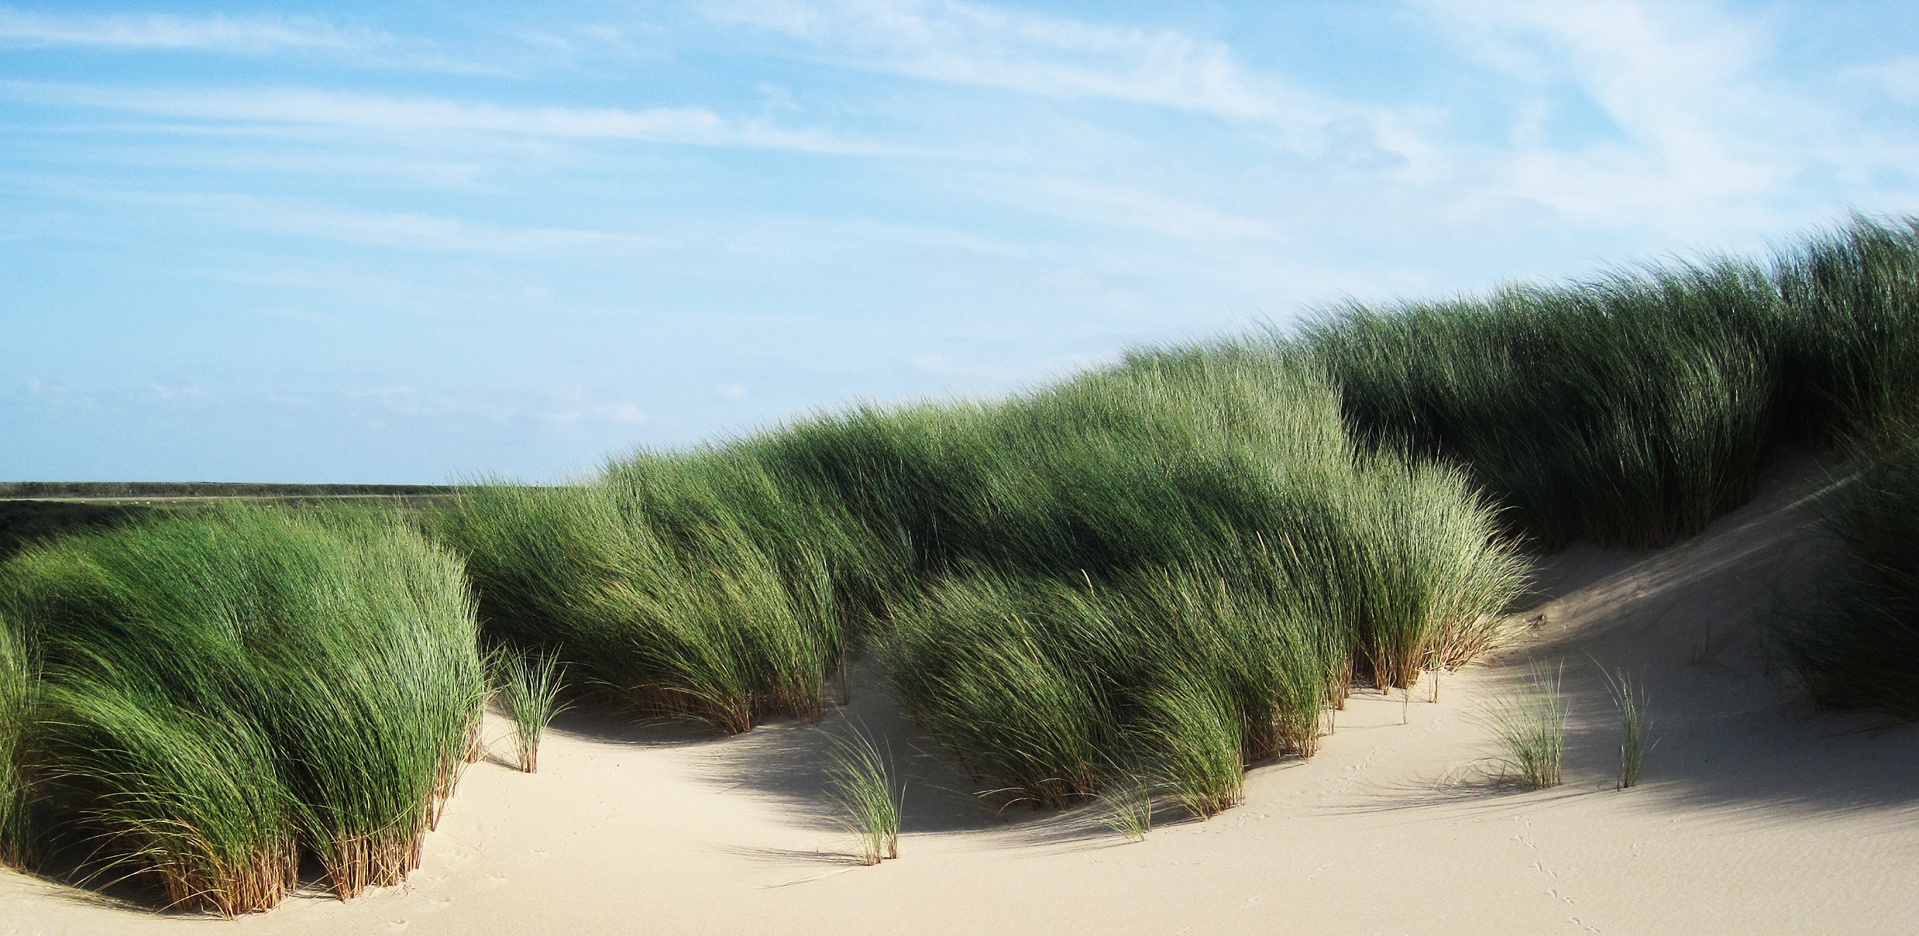 Sand dunes with beautiful blue sky and green marram grass